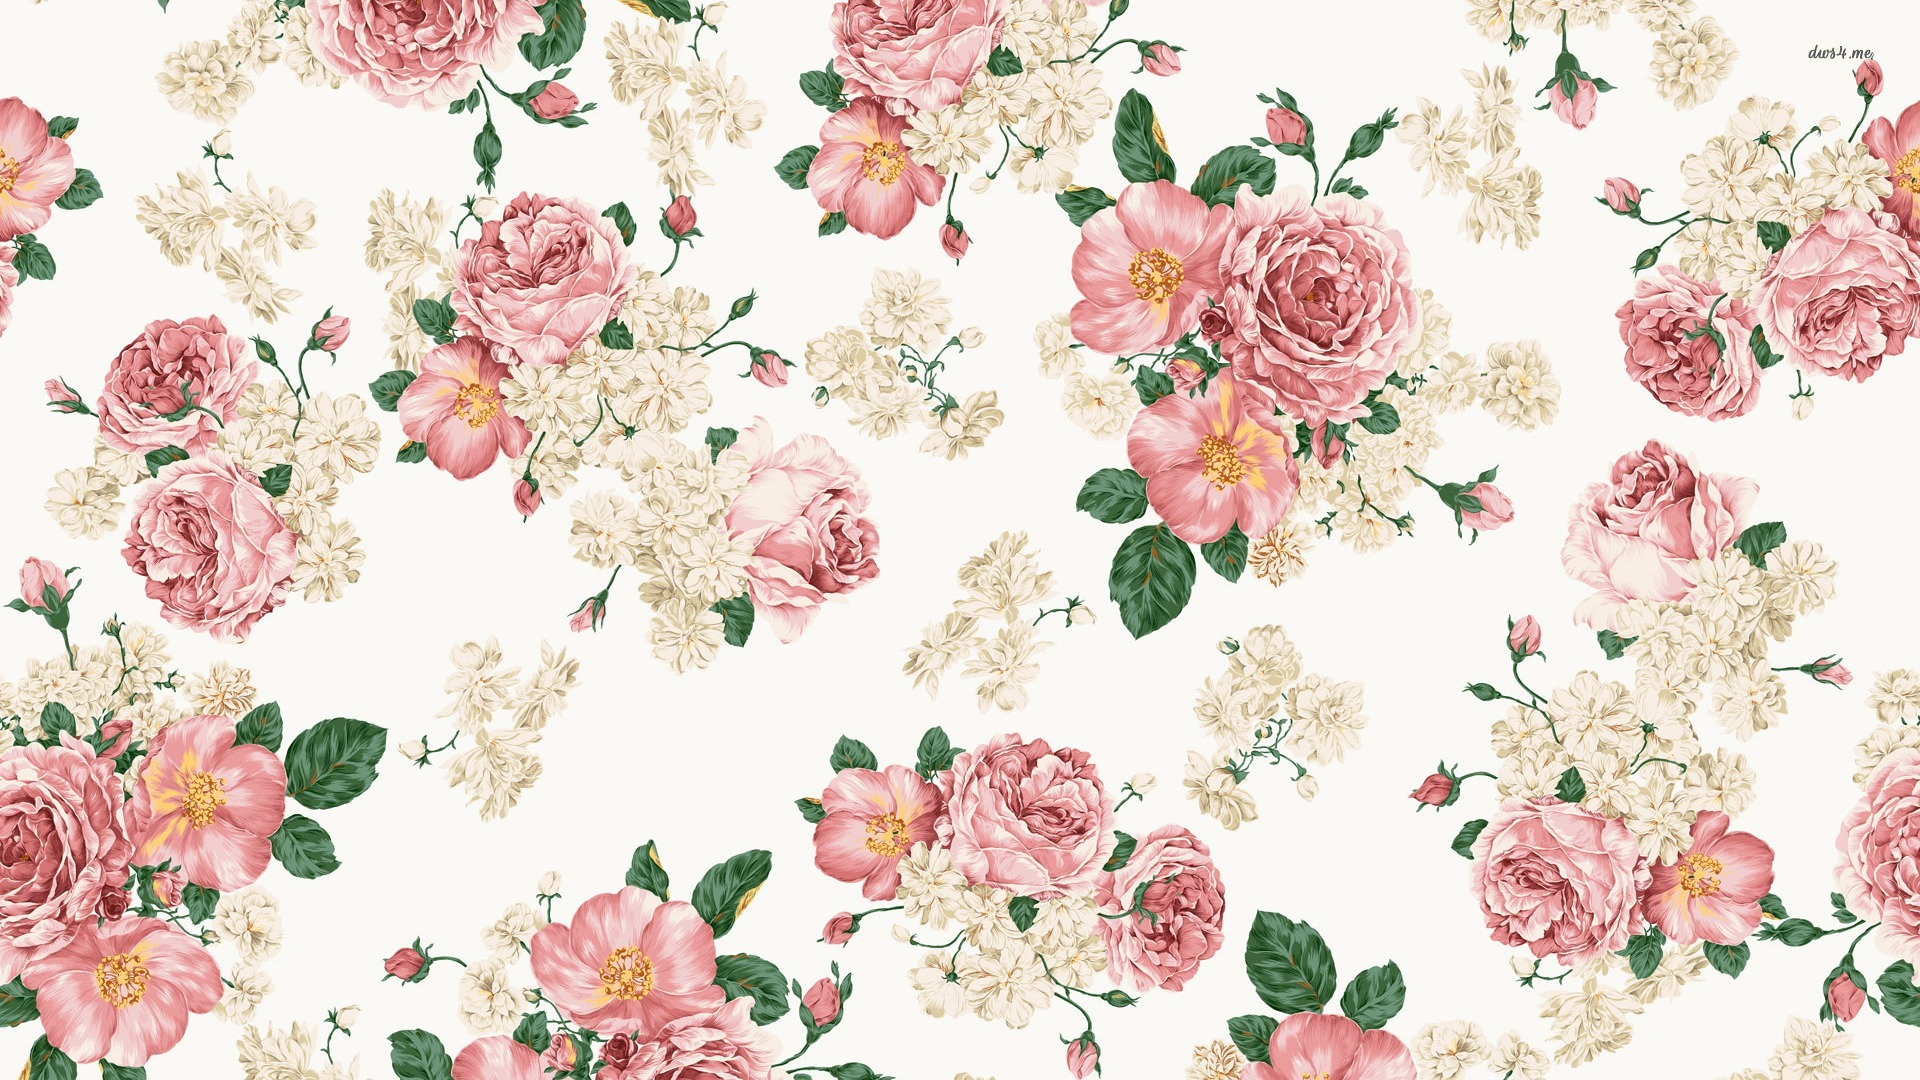 Vintage Roses Wallpaper High Definition Quality Widescreen